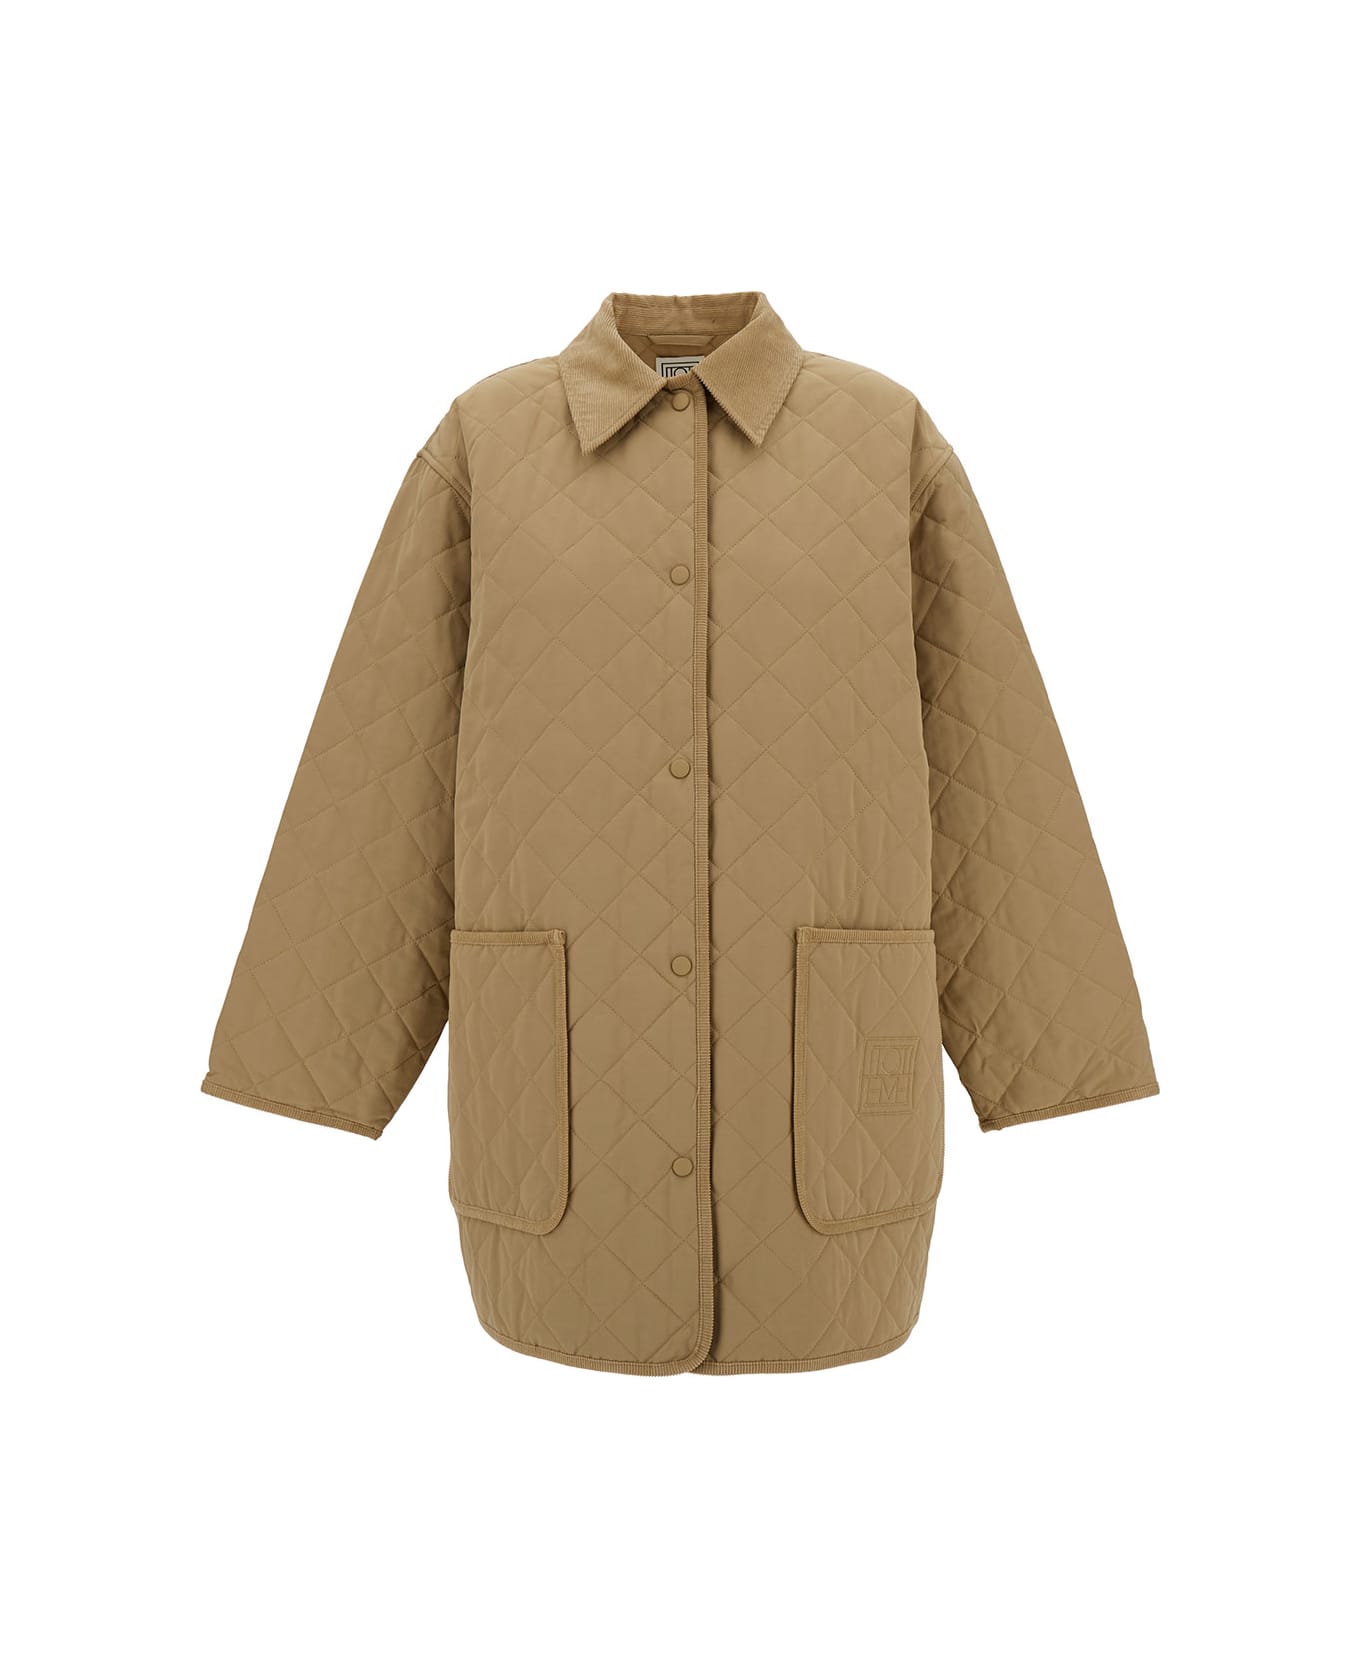 Totême Beige Jacket With Collar And Oversized Pockets In Quilted Fabric Woman - Beige コート